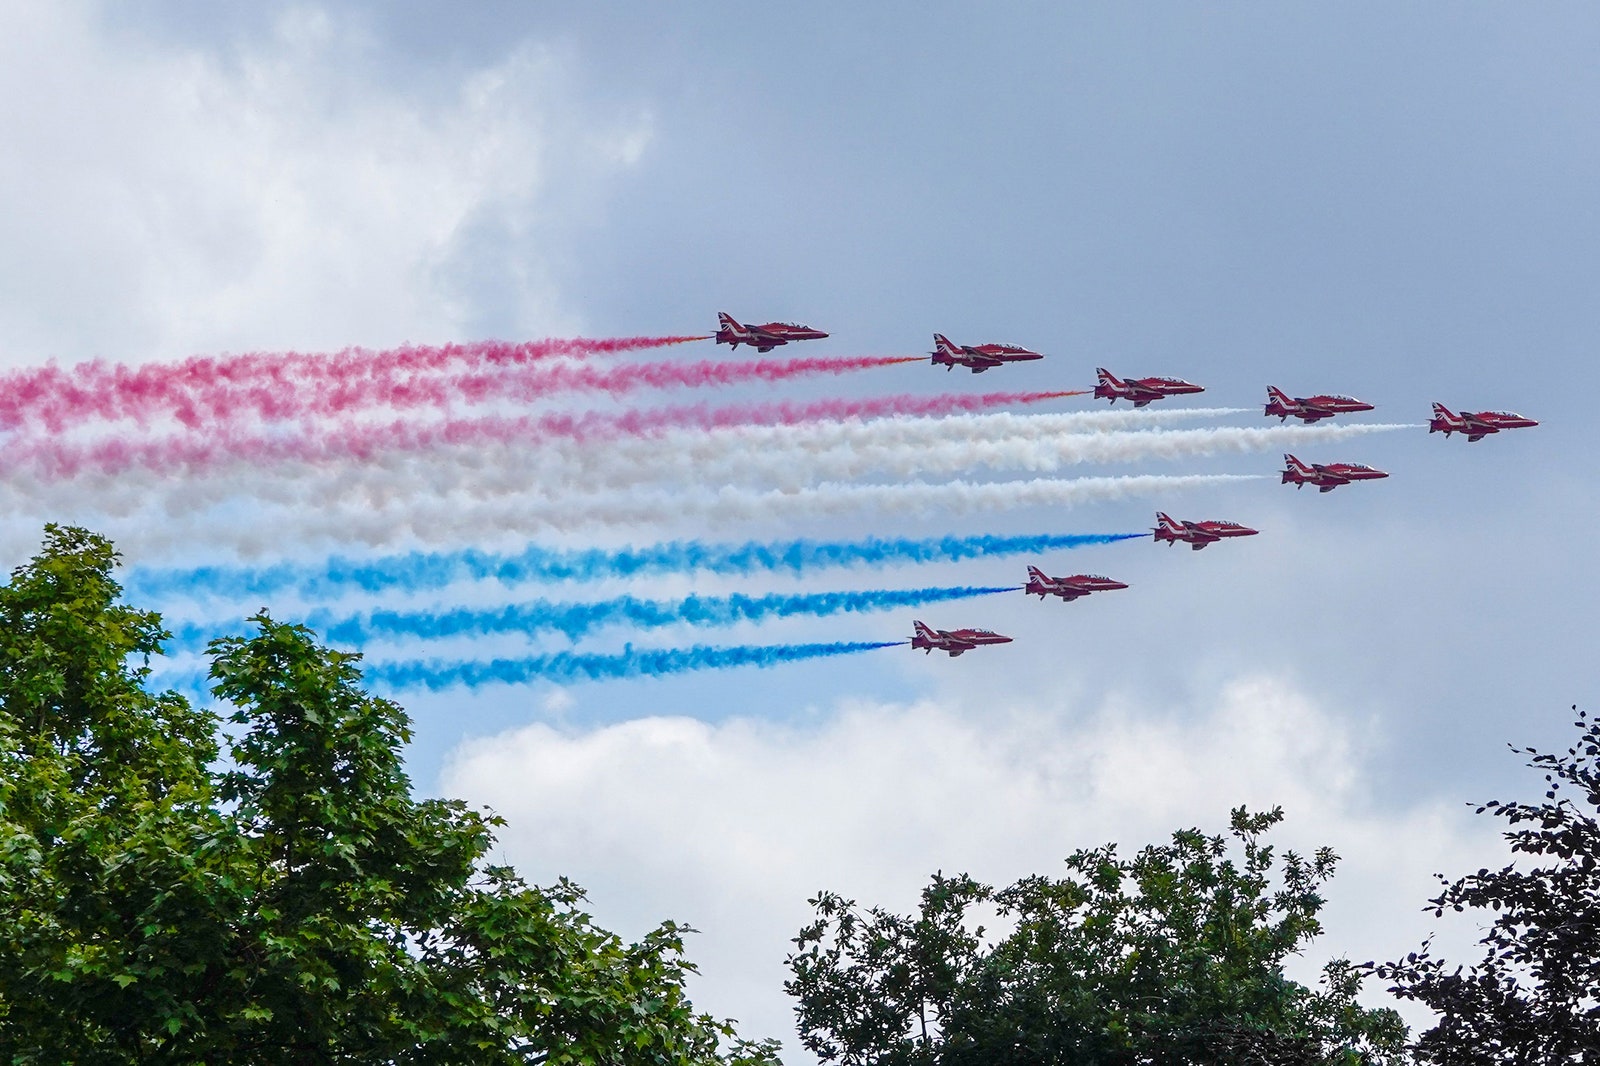 The Royal Air Force Aerobatic Team the Red Arrows fly in formation during a flypast.